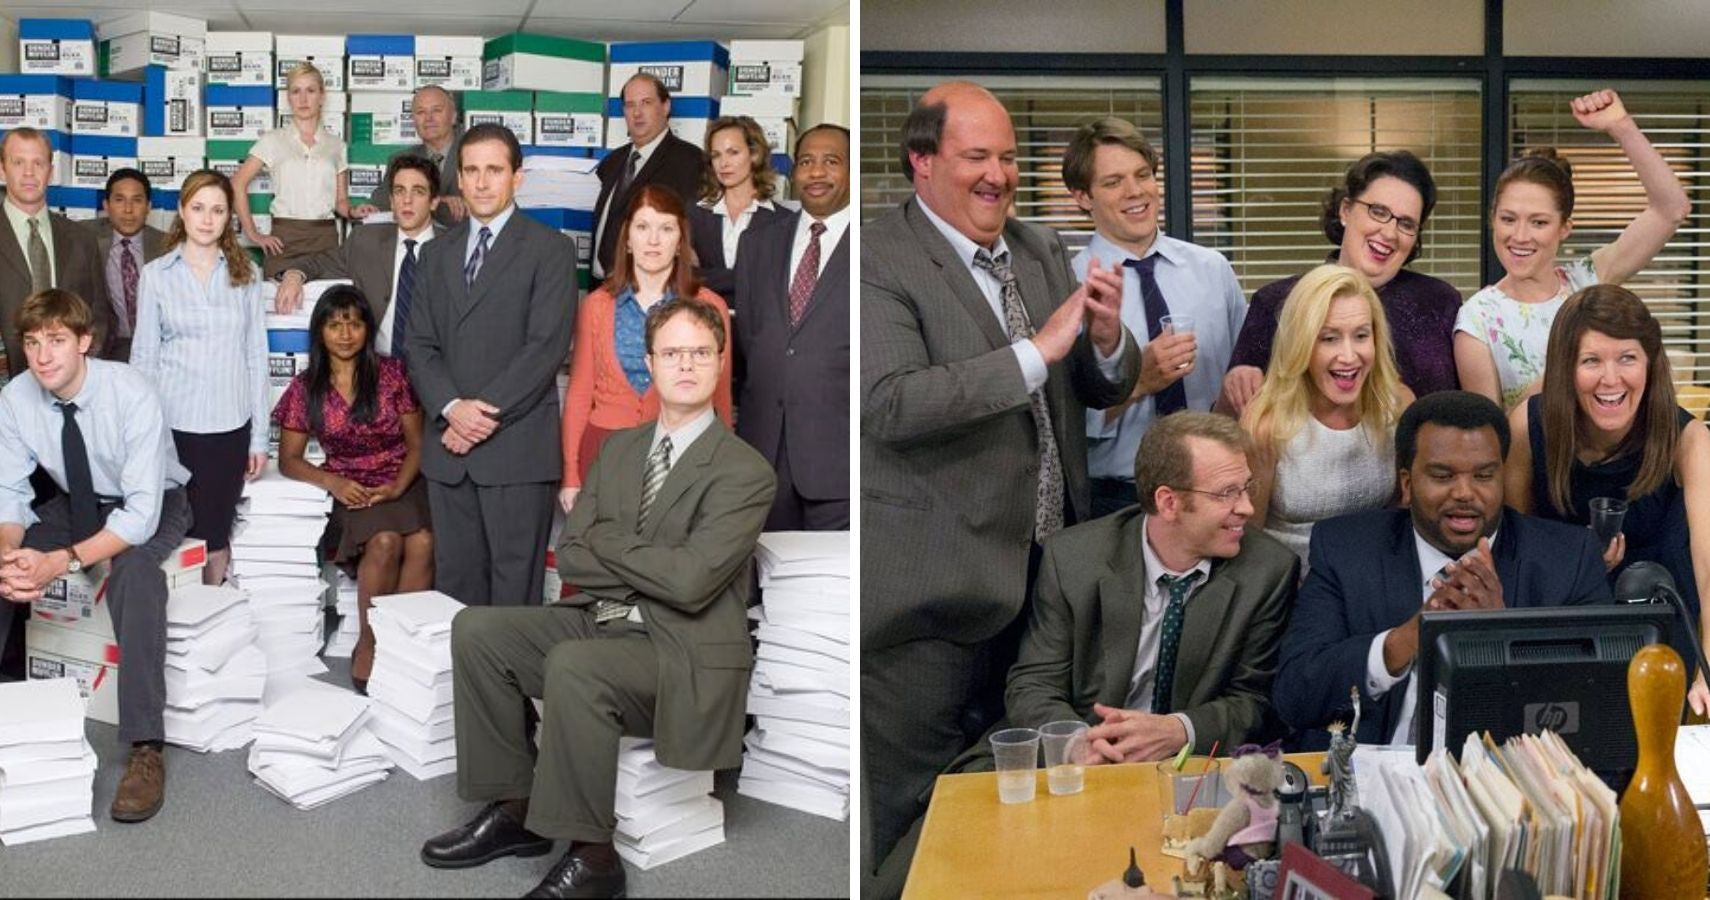 The Office: What Were The Characters' Salaries At Dunder Mifflin?  (According To Reddit)